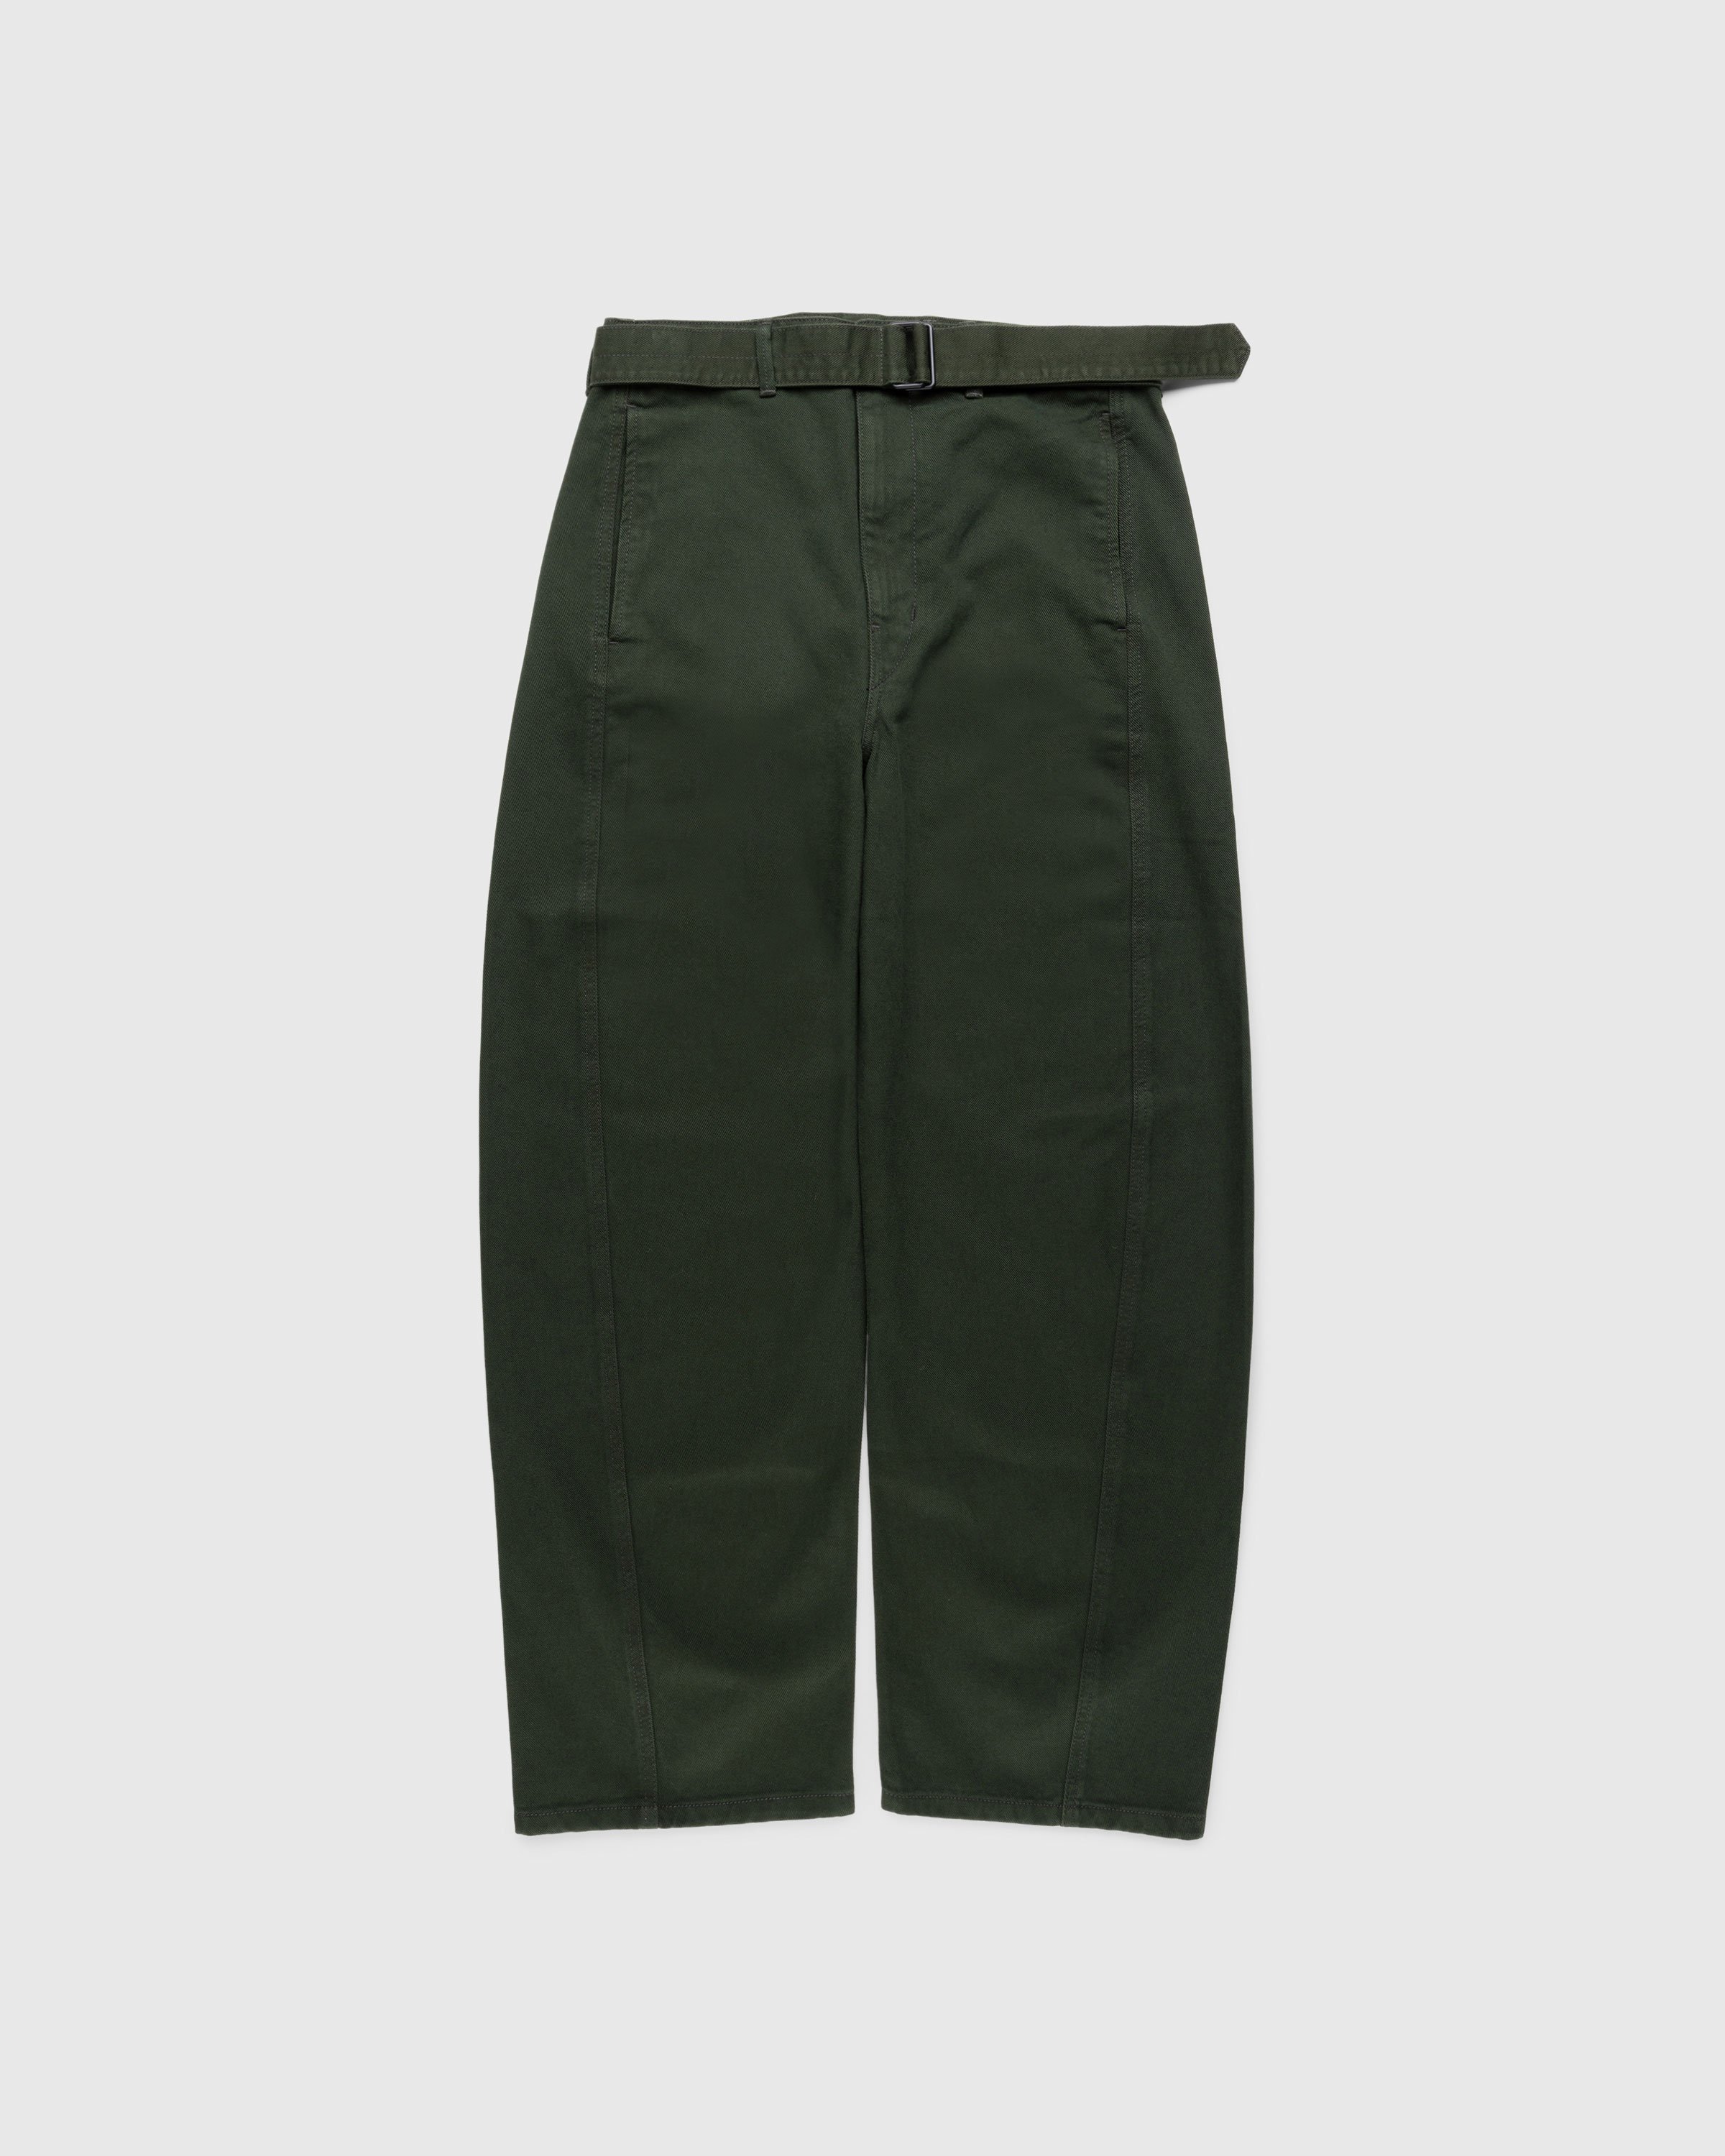 Lemaire Twisted Belted Pants in Espresso, Voo Store Berlin